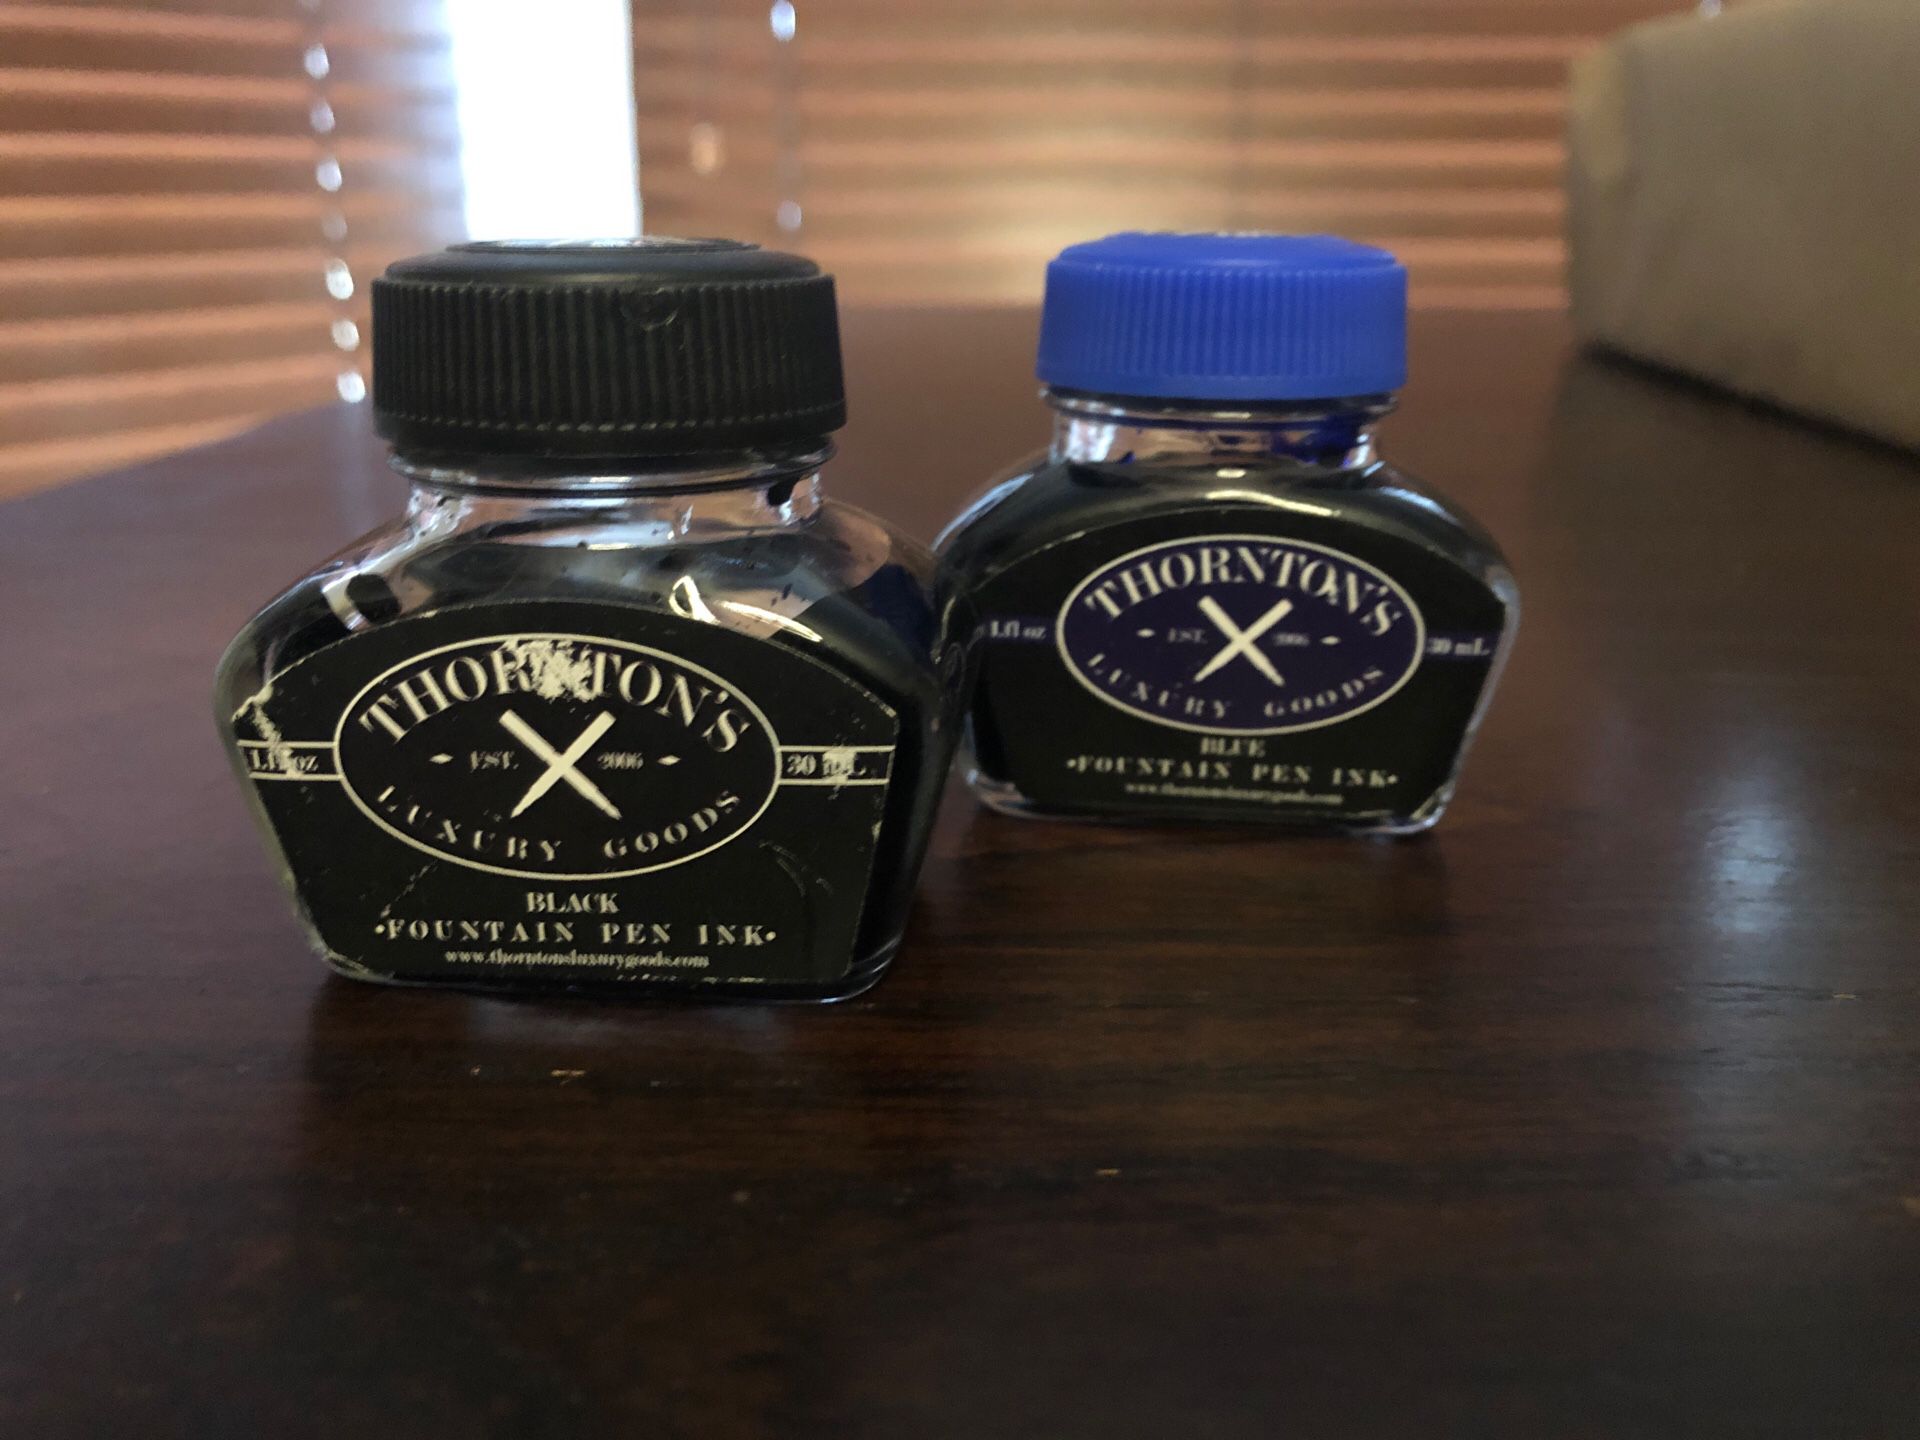 Thornton’s Fountain Pen Ink Blue and Black